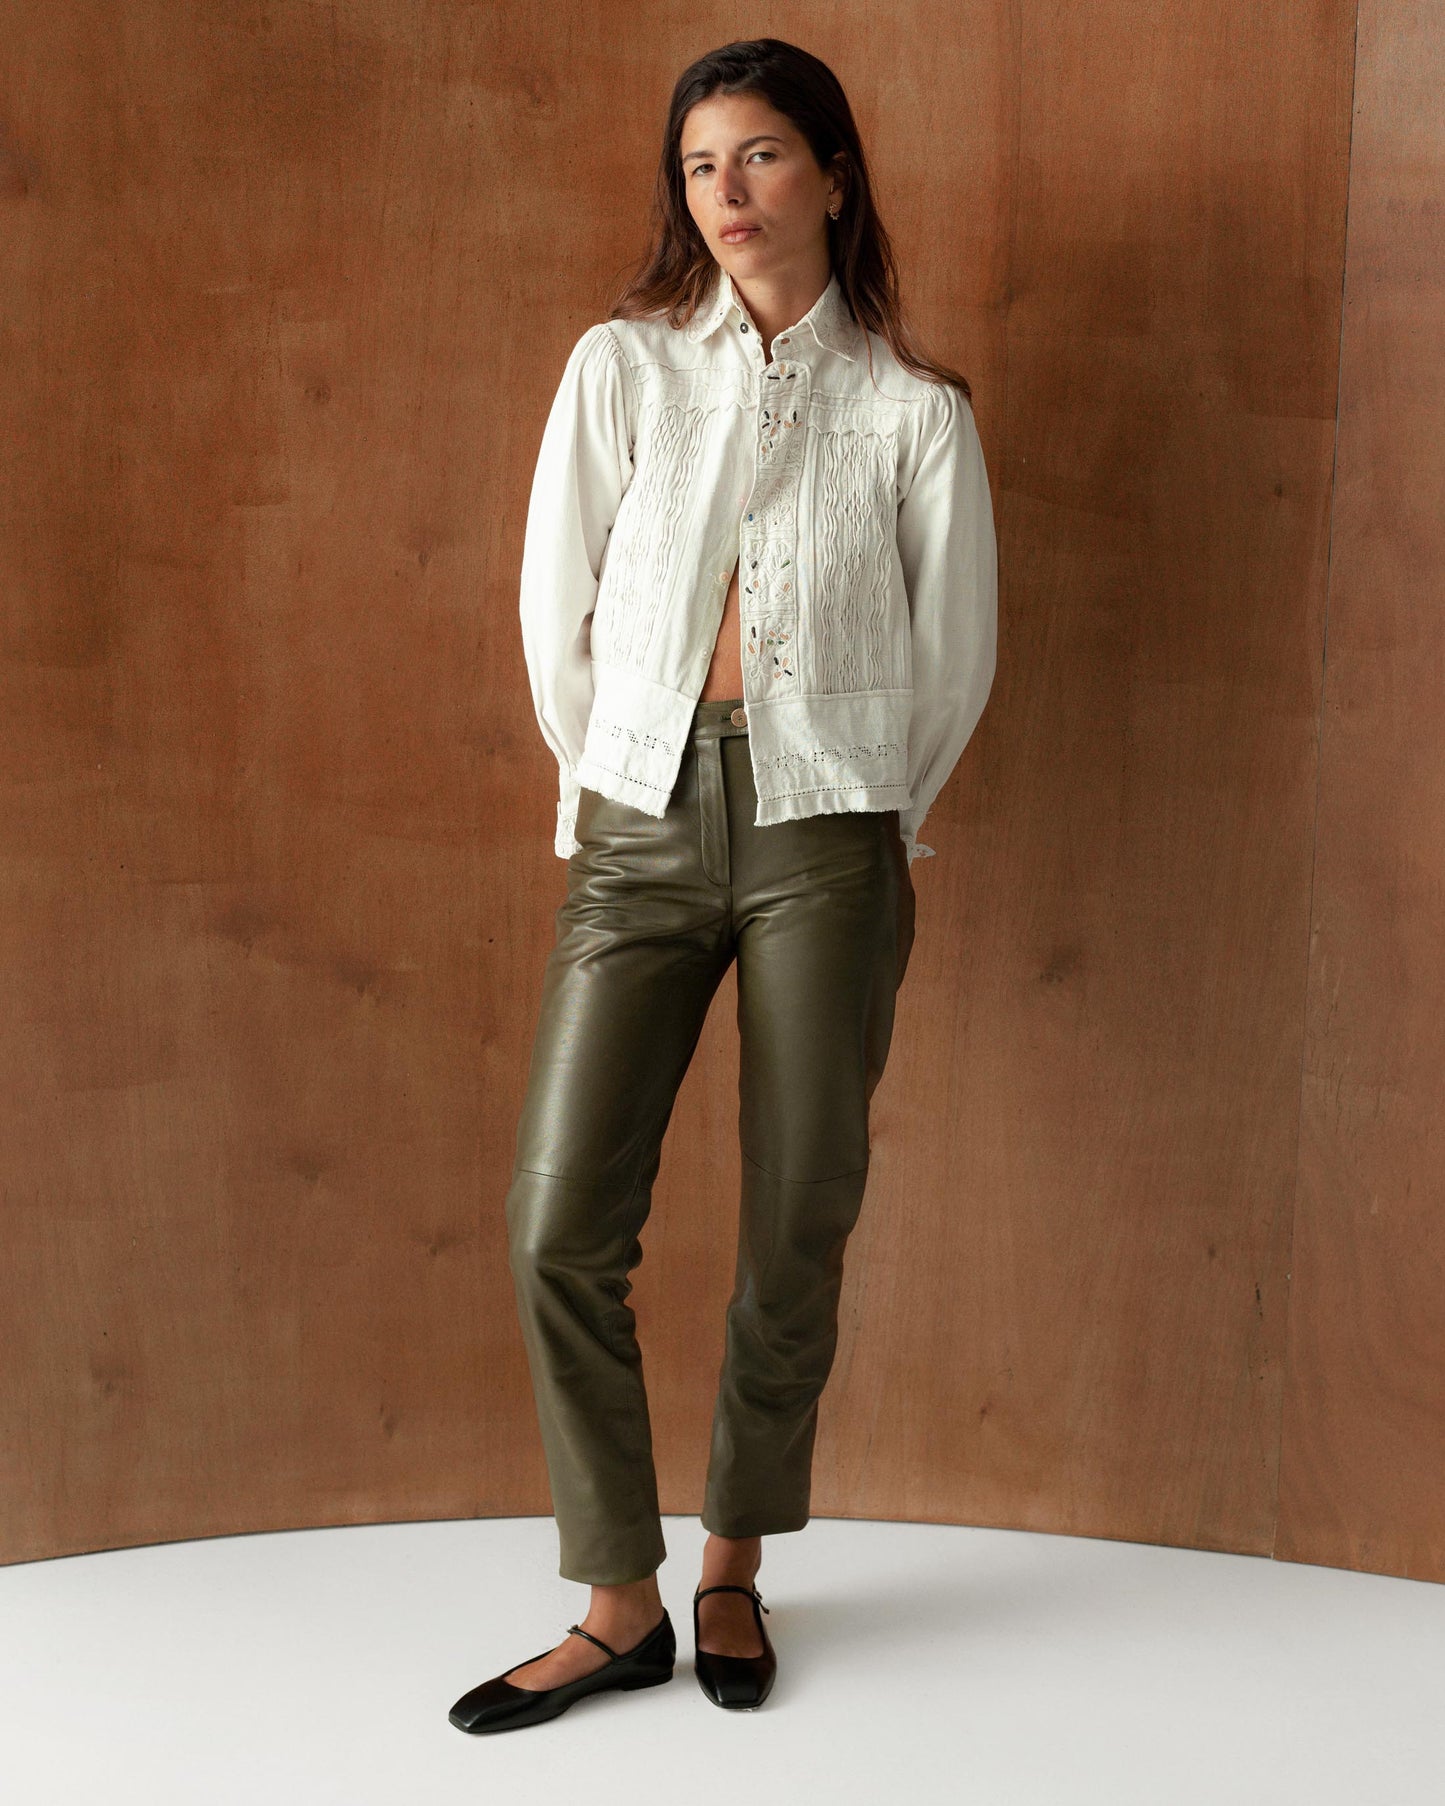 FALLON-trousers-chanel-green-leather-vintage-women-luxury-clothing-rare-fashion-curated-art-collection